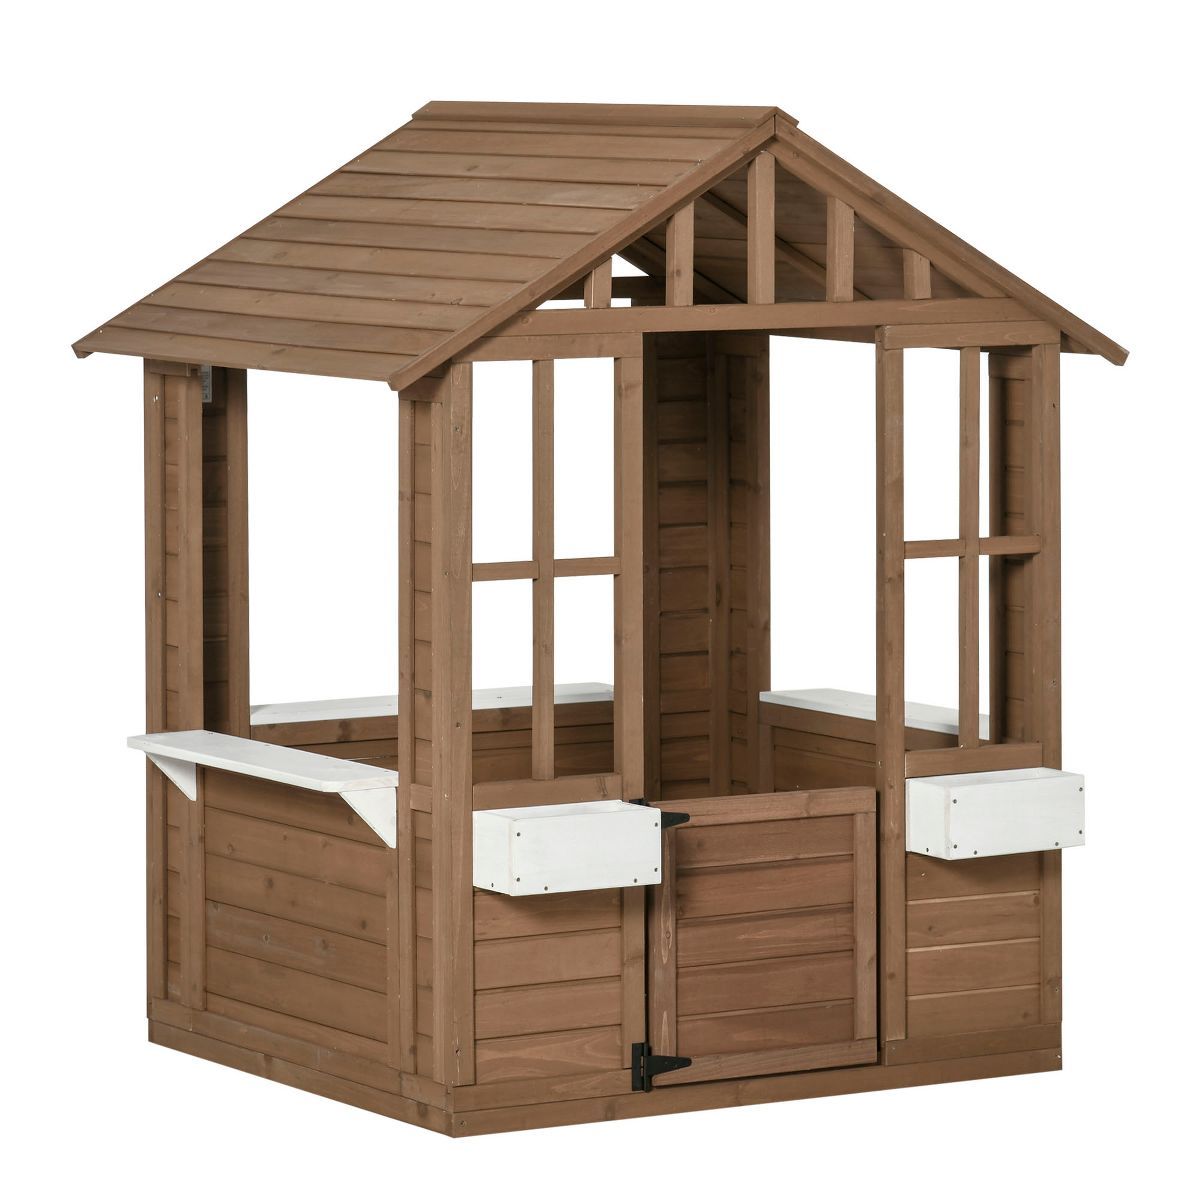 Outsunny Kids Wooden Playhouse, Outdoor Garden Games Cottage, with Working Door, Windows, Flowers... | Target